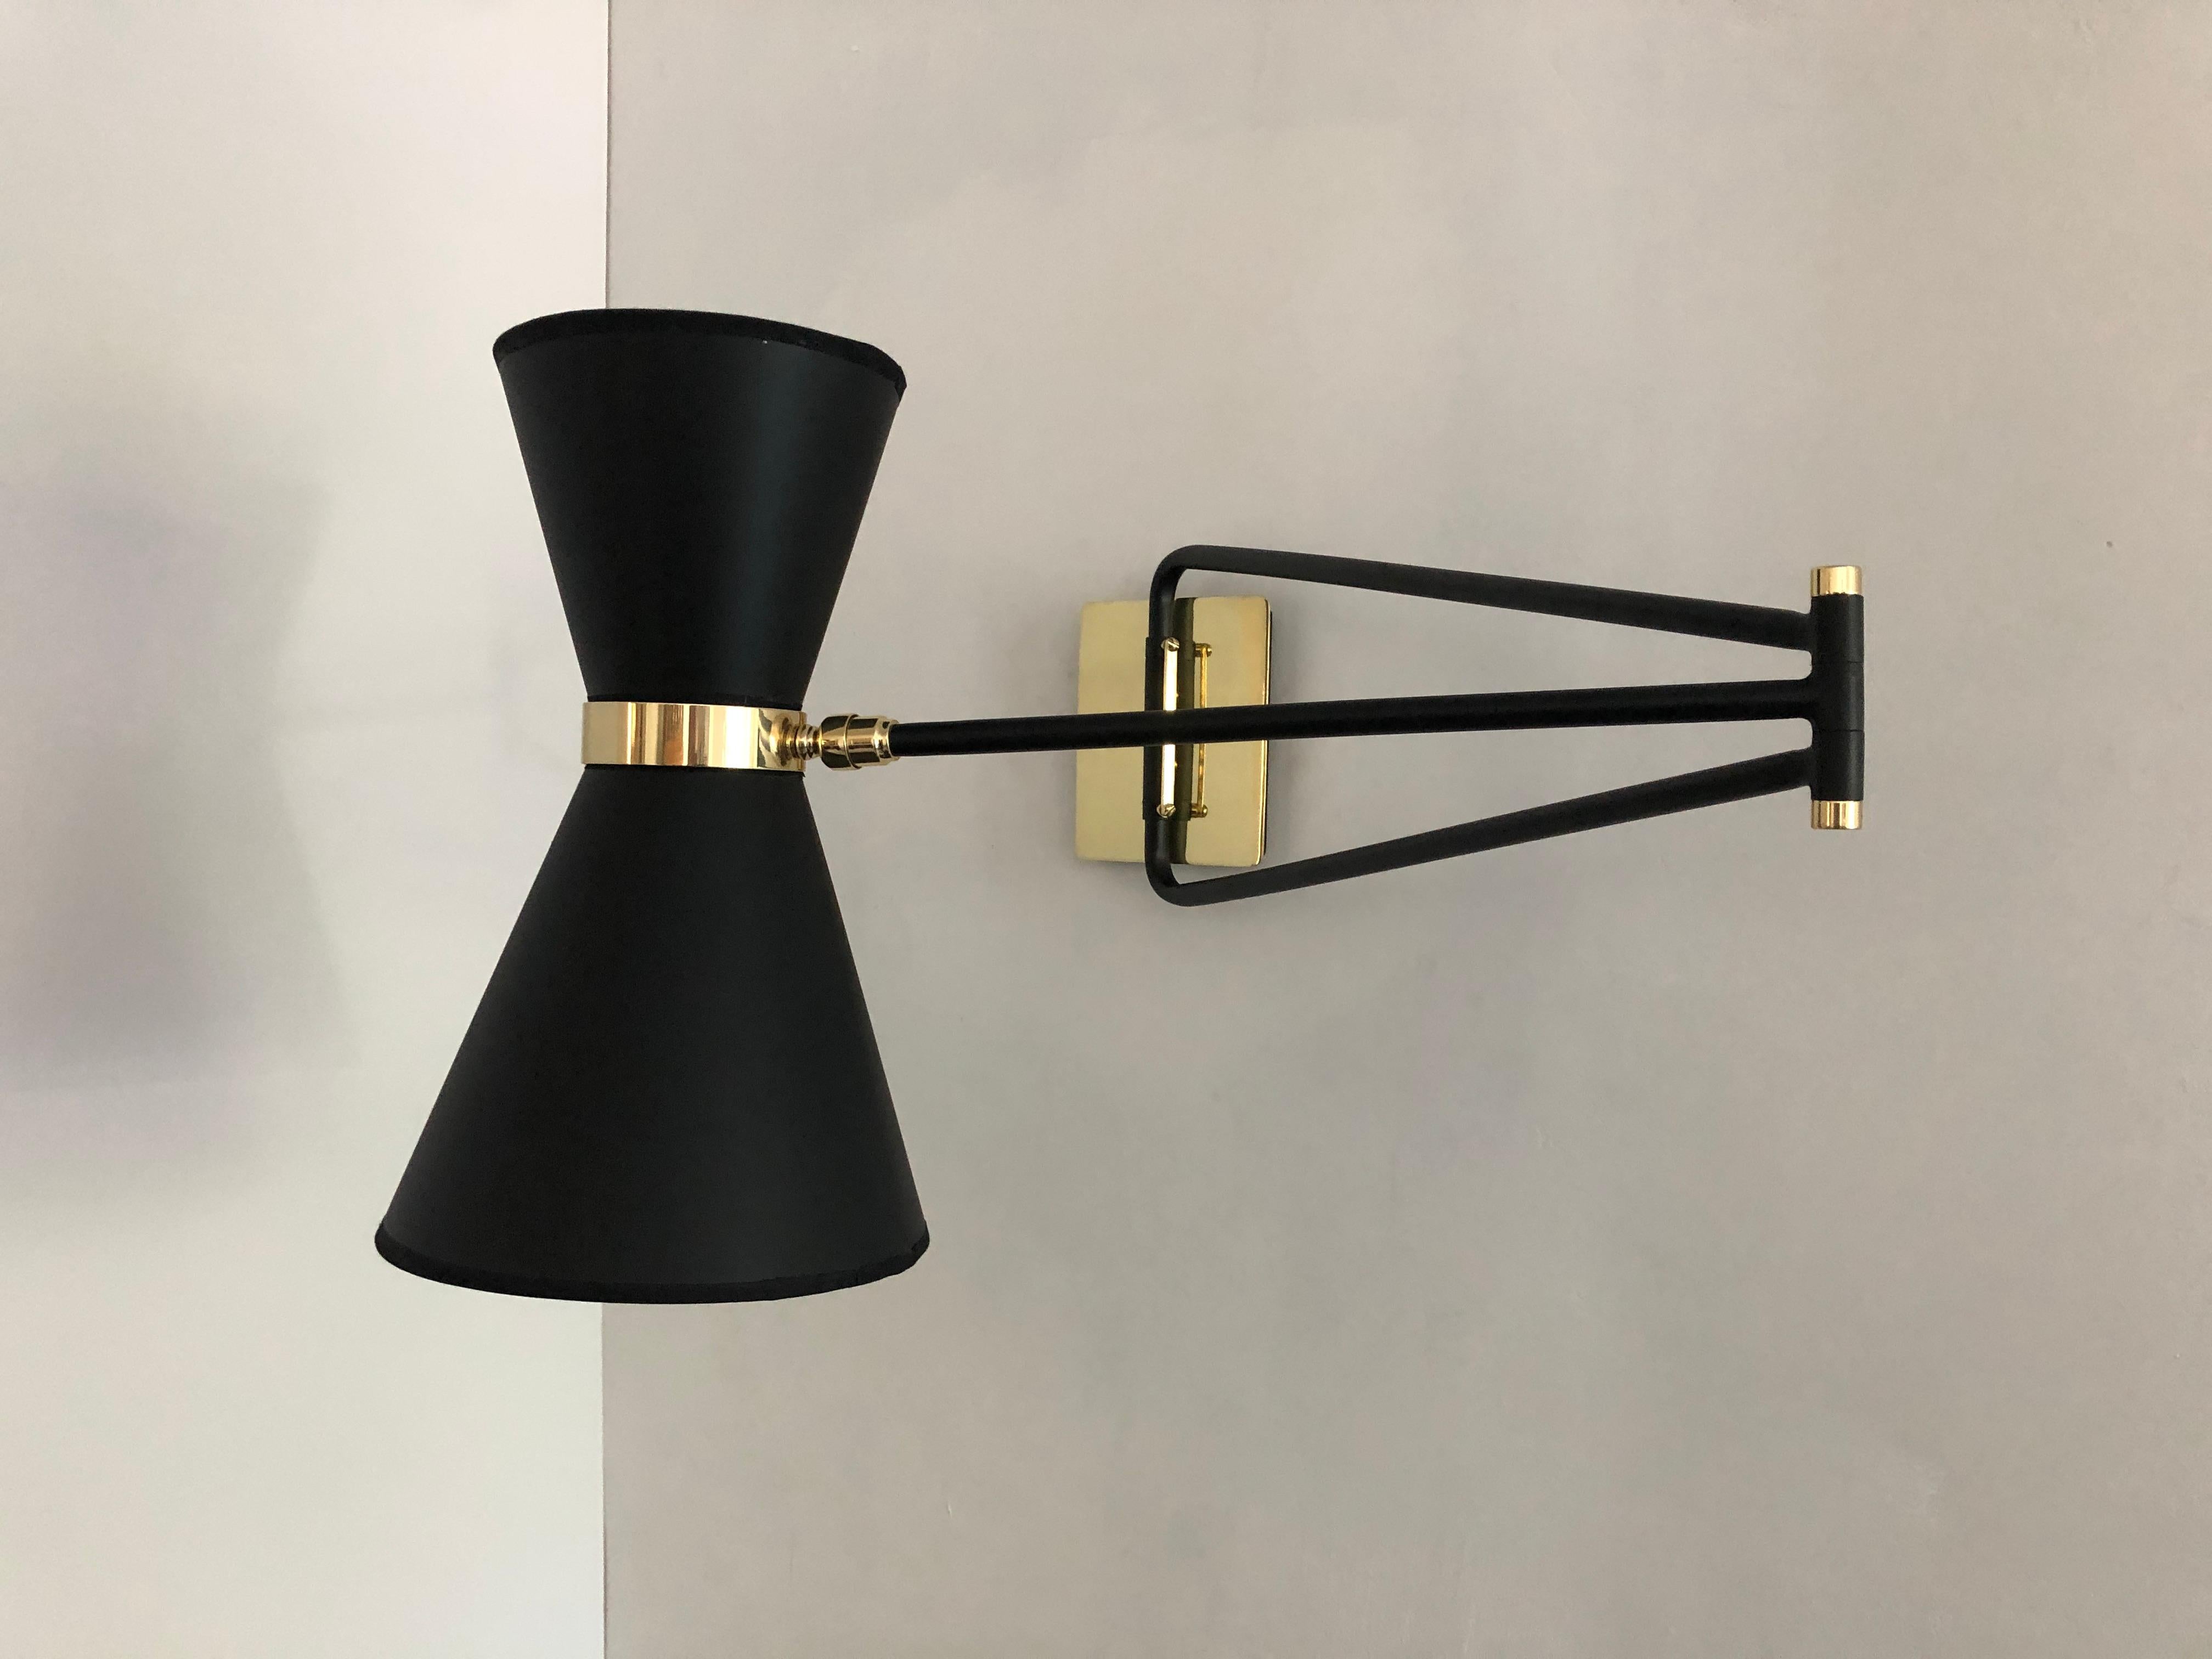 American Bolivar Sconce, Black Paper Shade, by Bourgeois Boheme Atelier